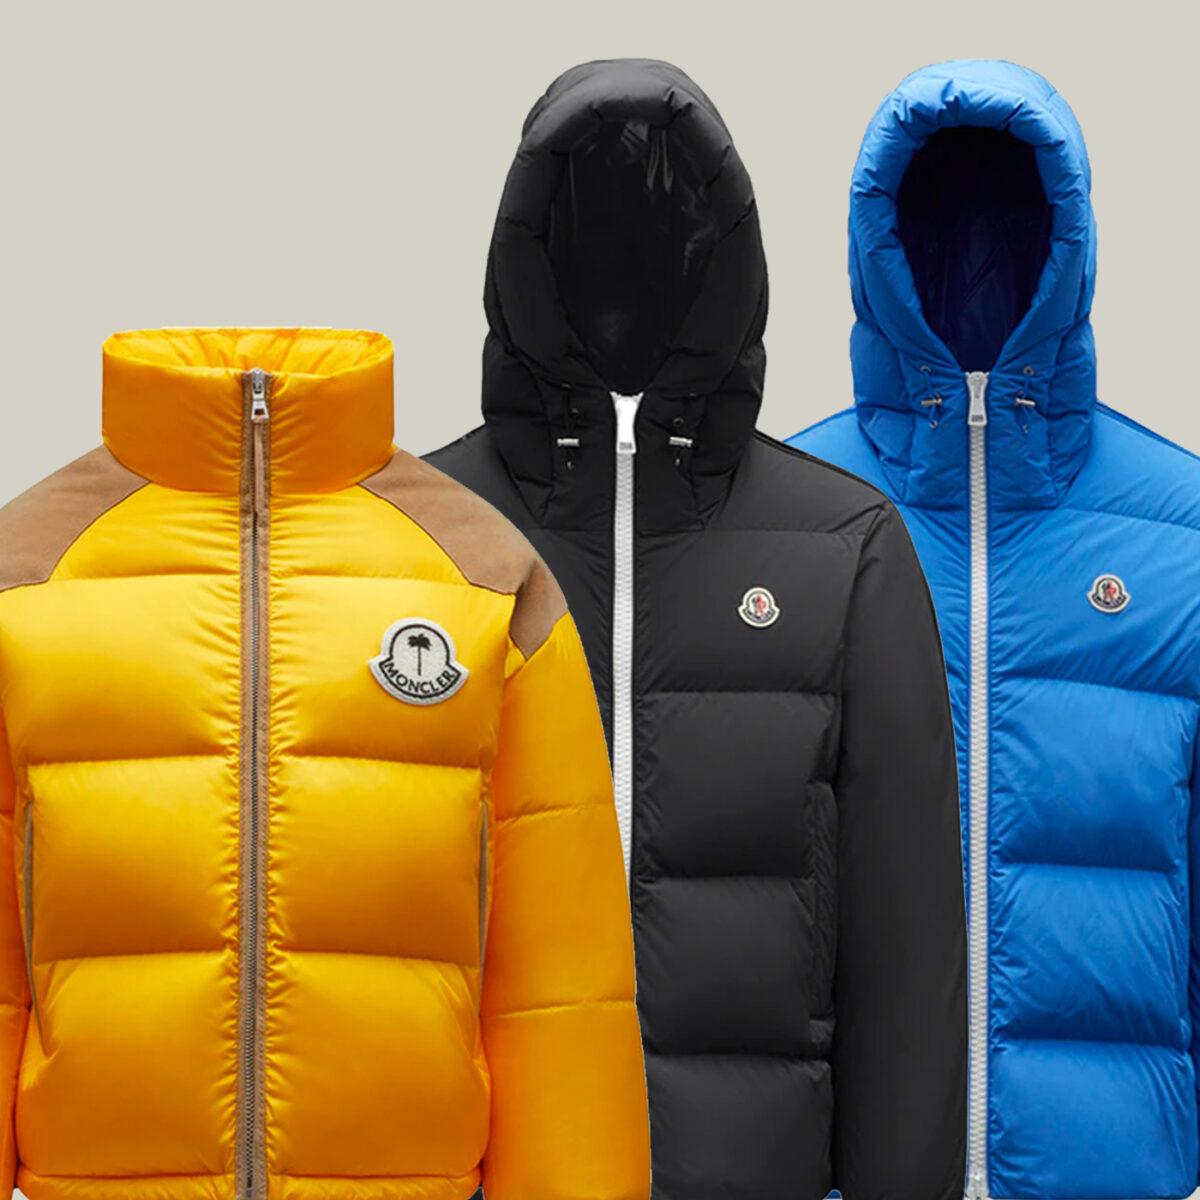 Moncler takes step forward in Stone Island integration